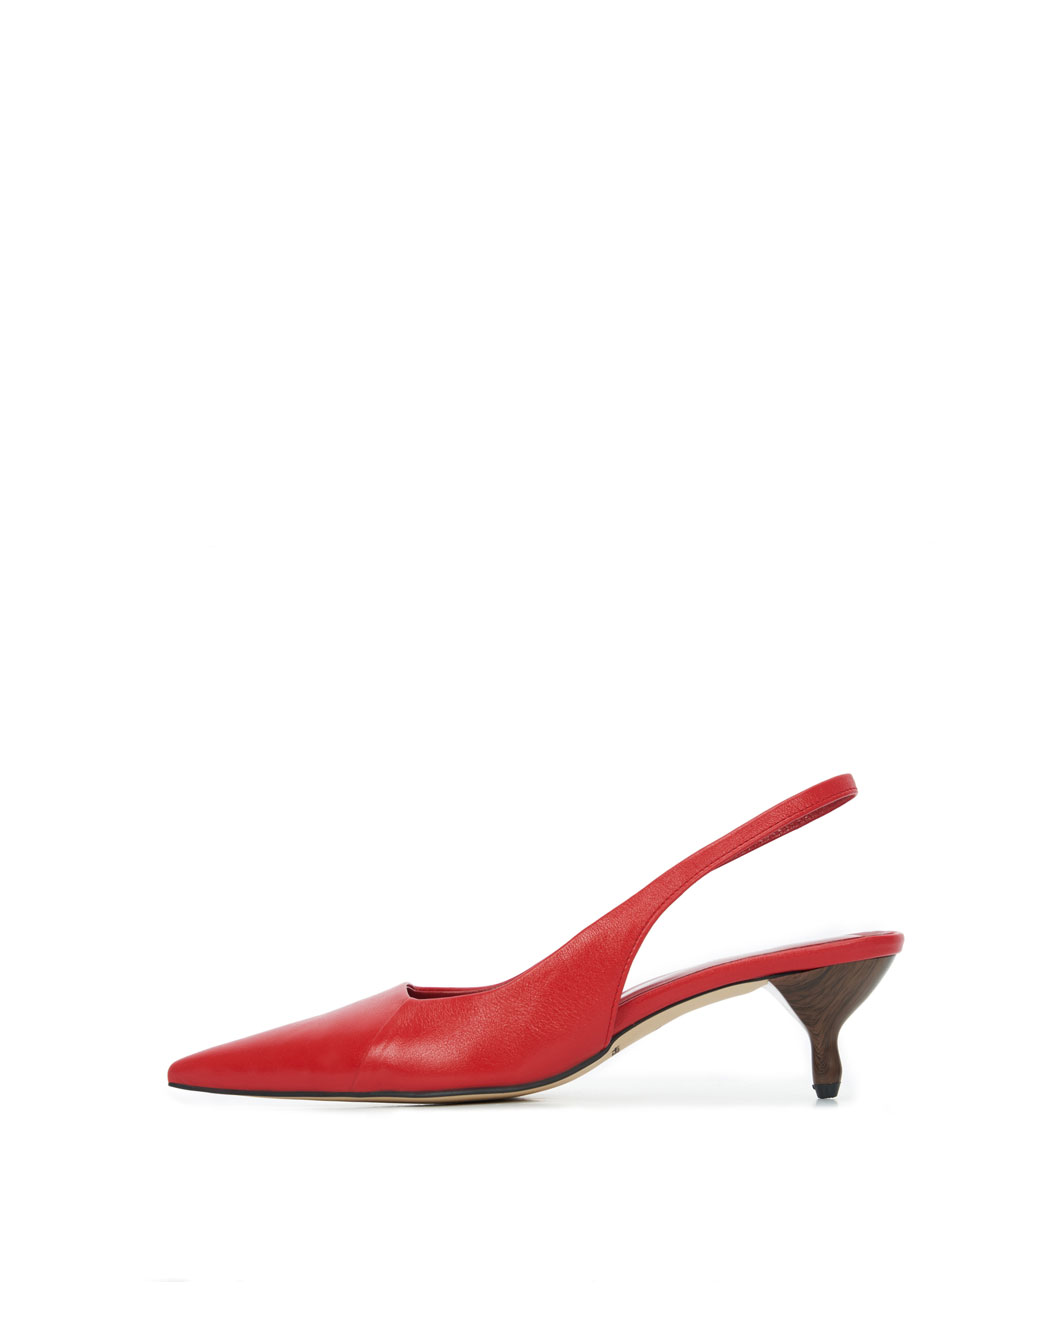 The Line Slingback - RED